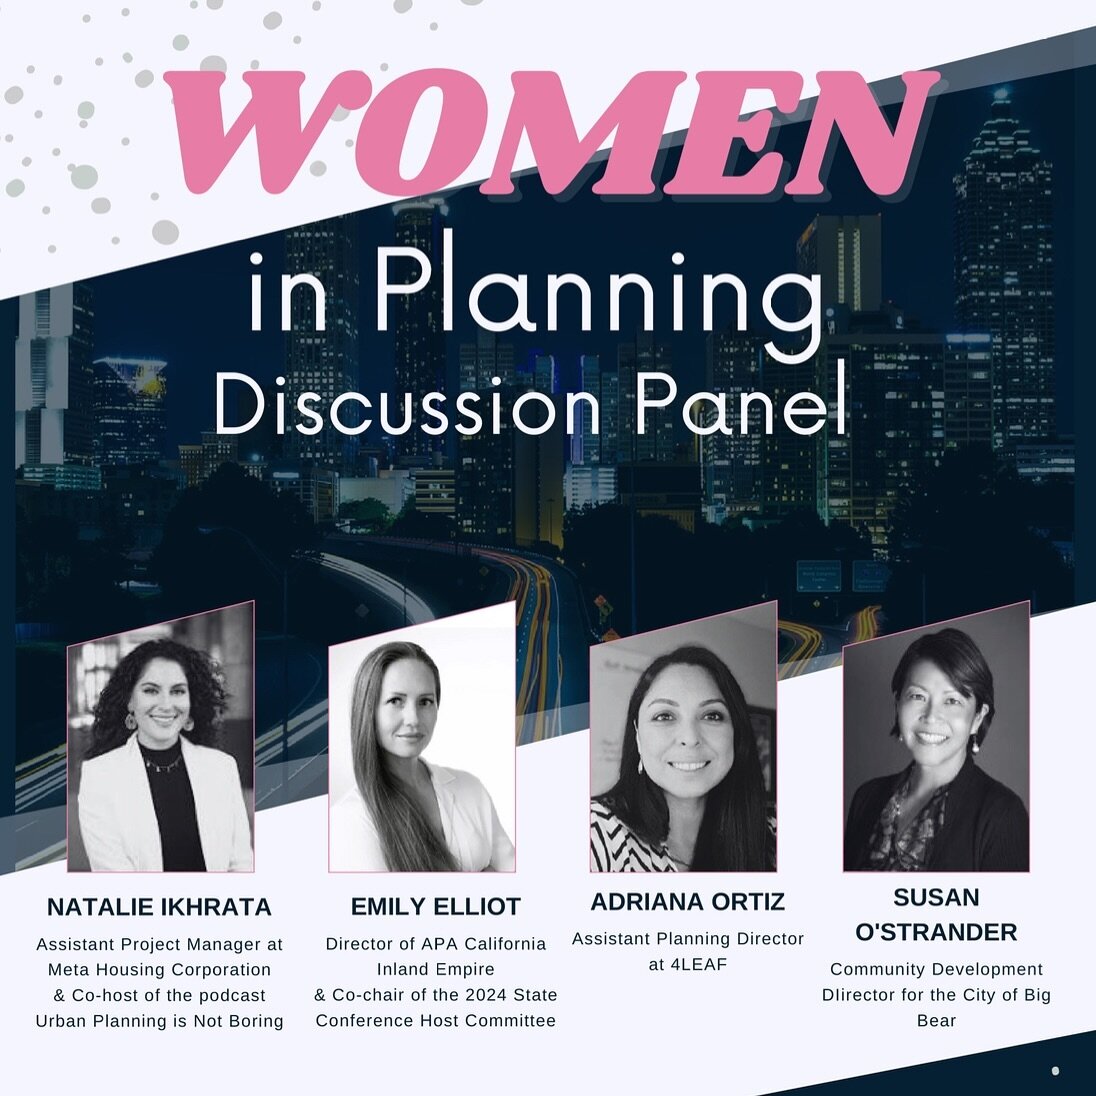 Our very own @natalieikhrata will be joining amazing representatives from @inlandempireapa, 4LEAF, and City of Big Bear Community Development for a Women in Planning Discussion Panel at @calpolypomona ! We are so proud of you, Nat! 🫶